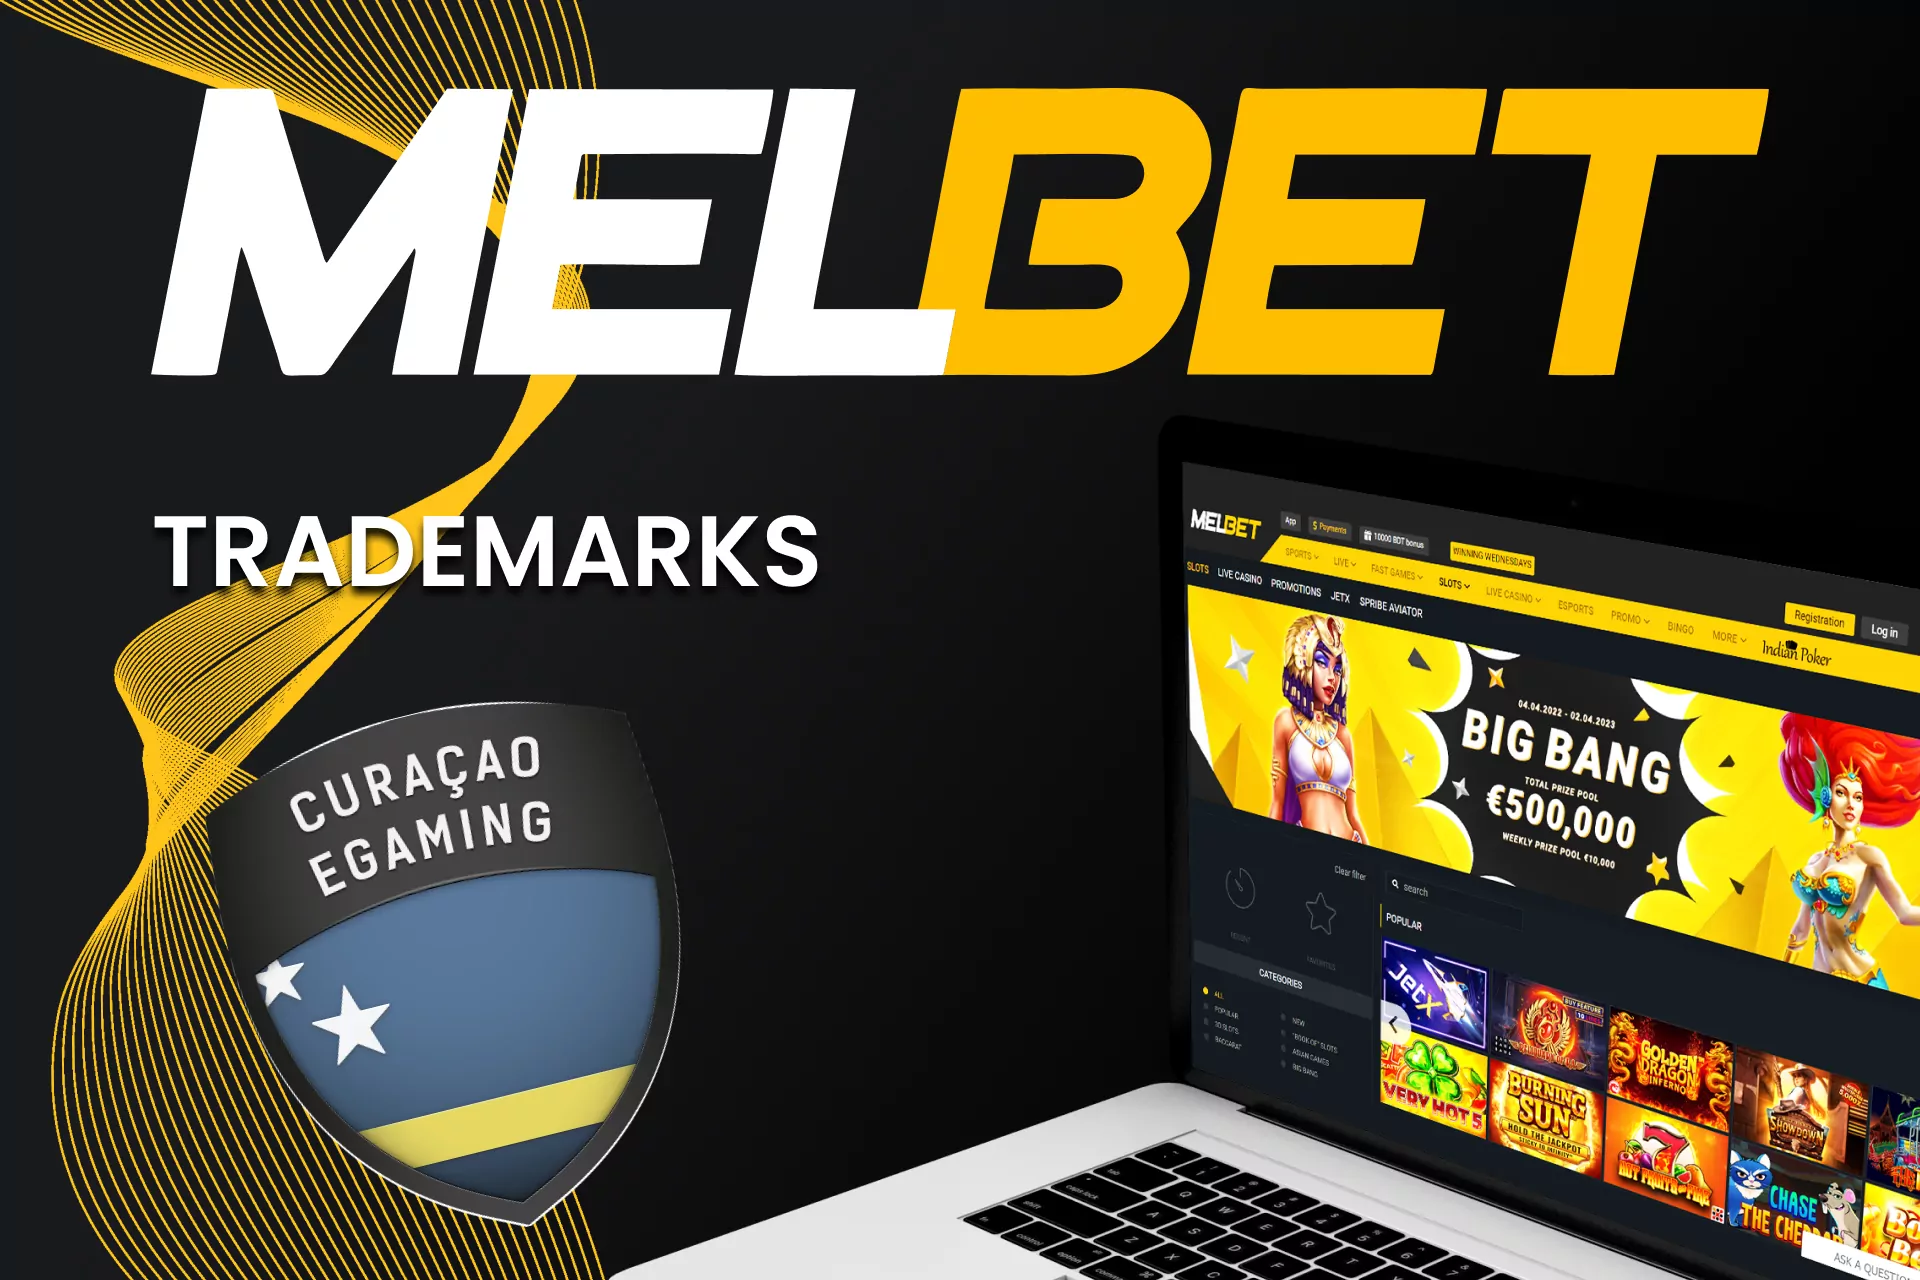 Part of the logo on the Melbet website belongs to Curaçao.